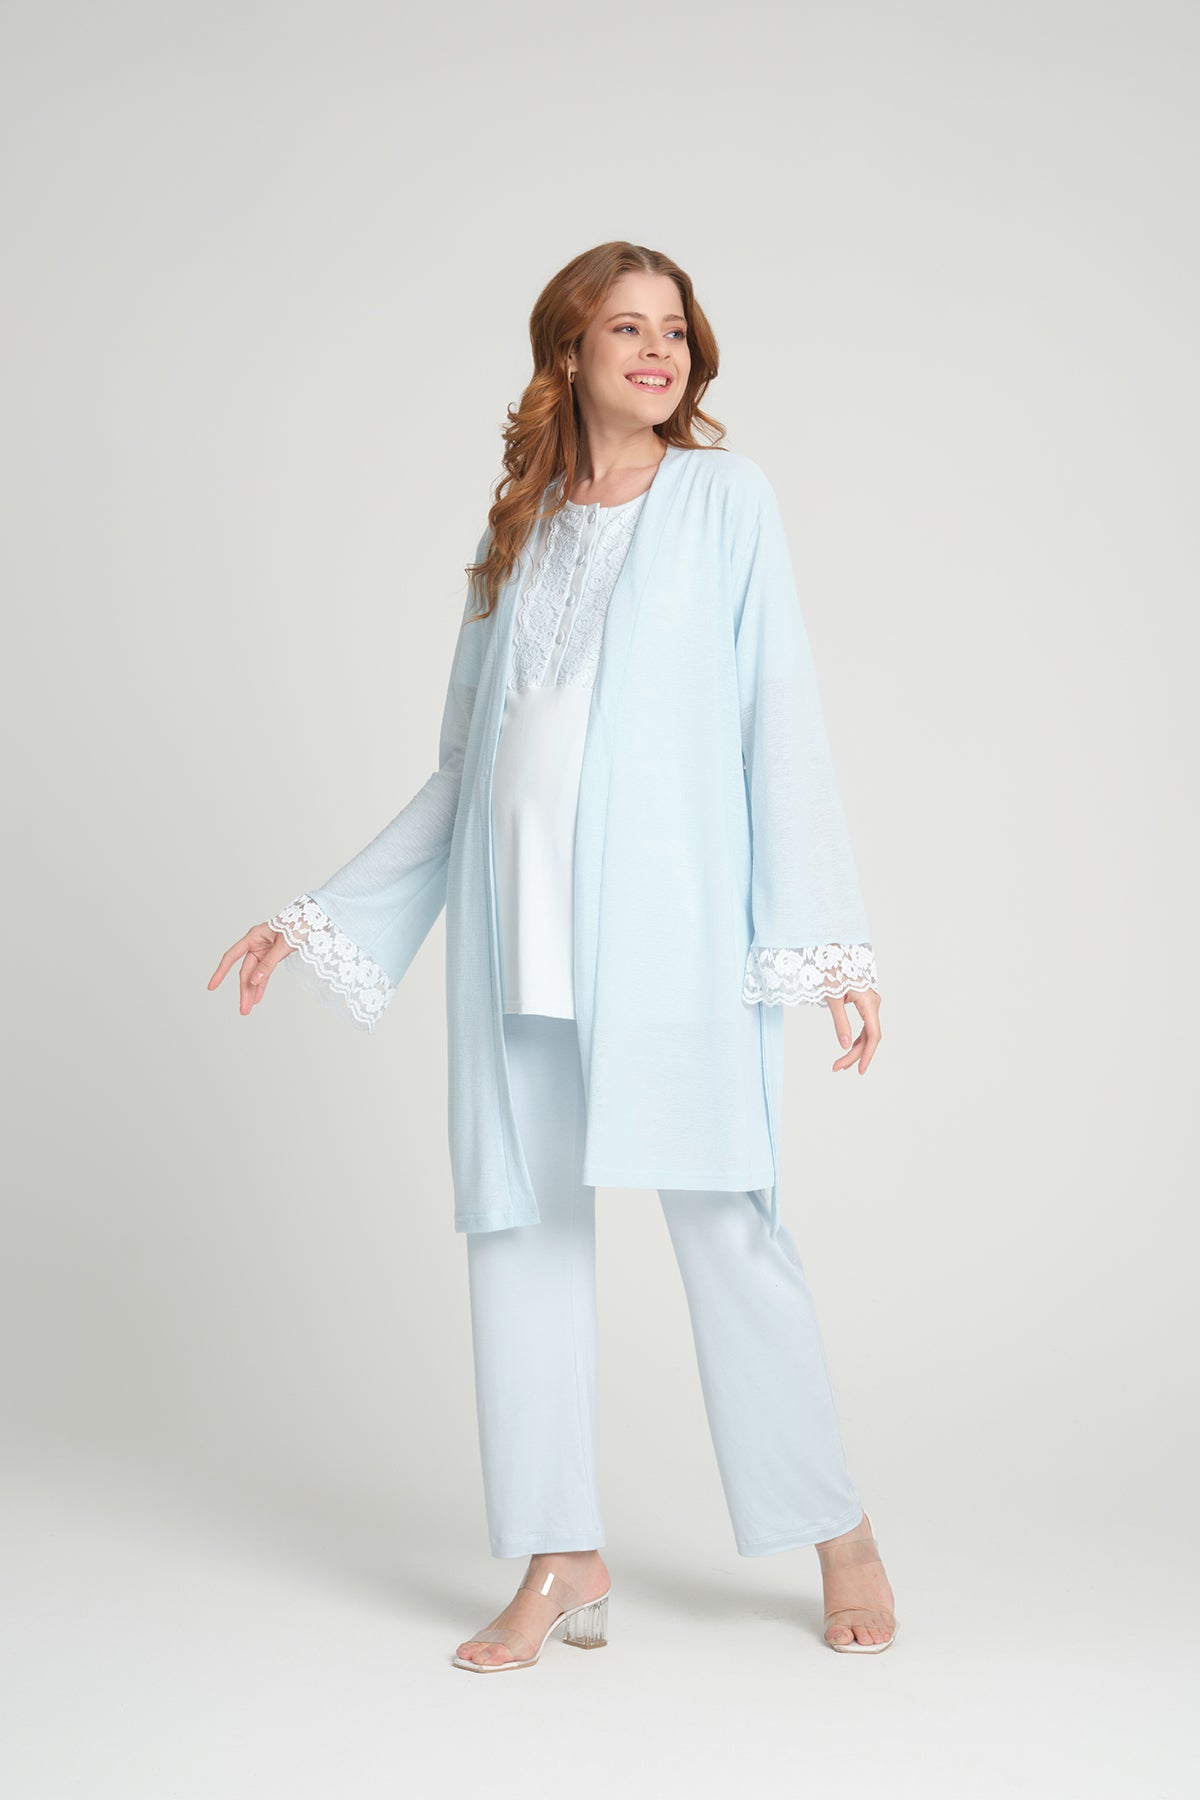 Shopymommy 209 Lace Detailed 3-Pieces Maternity & Nursing Pajamas With Robe Blue